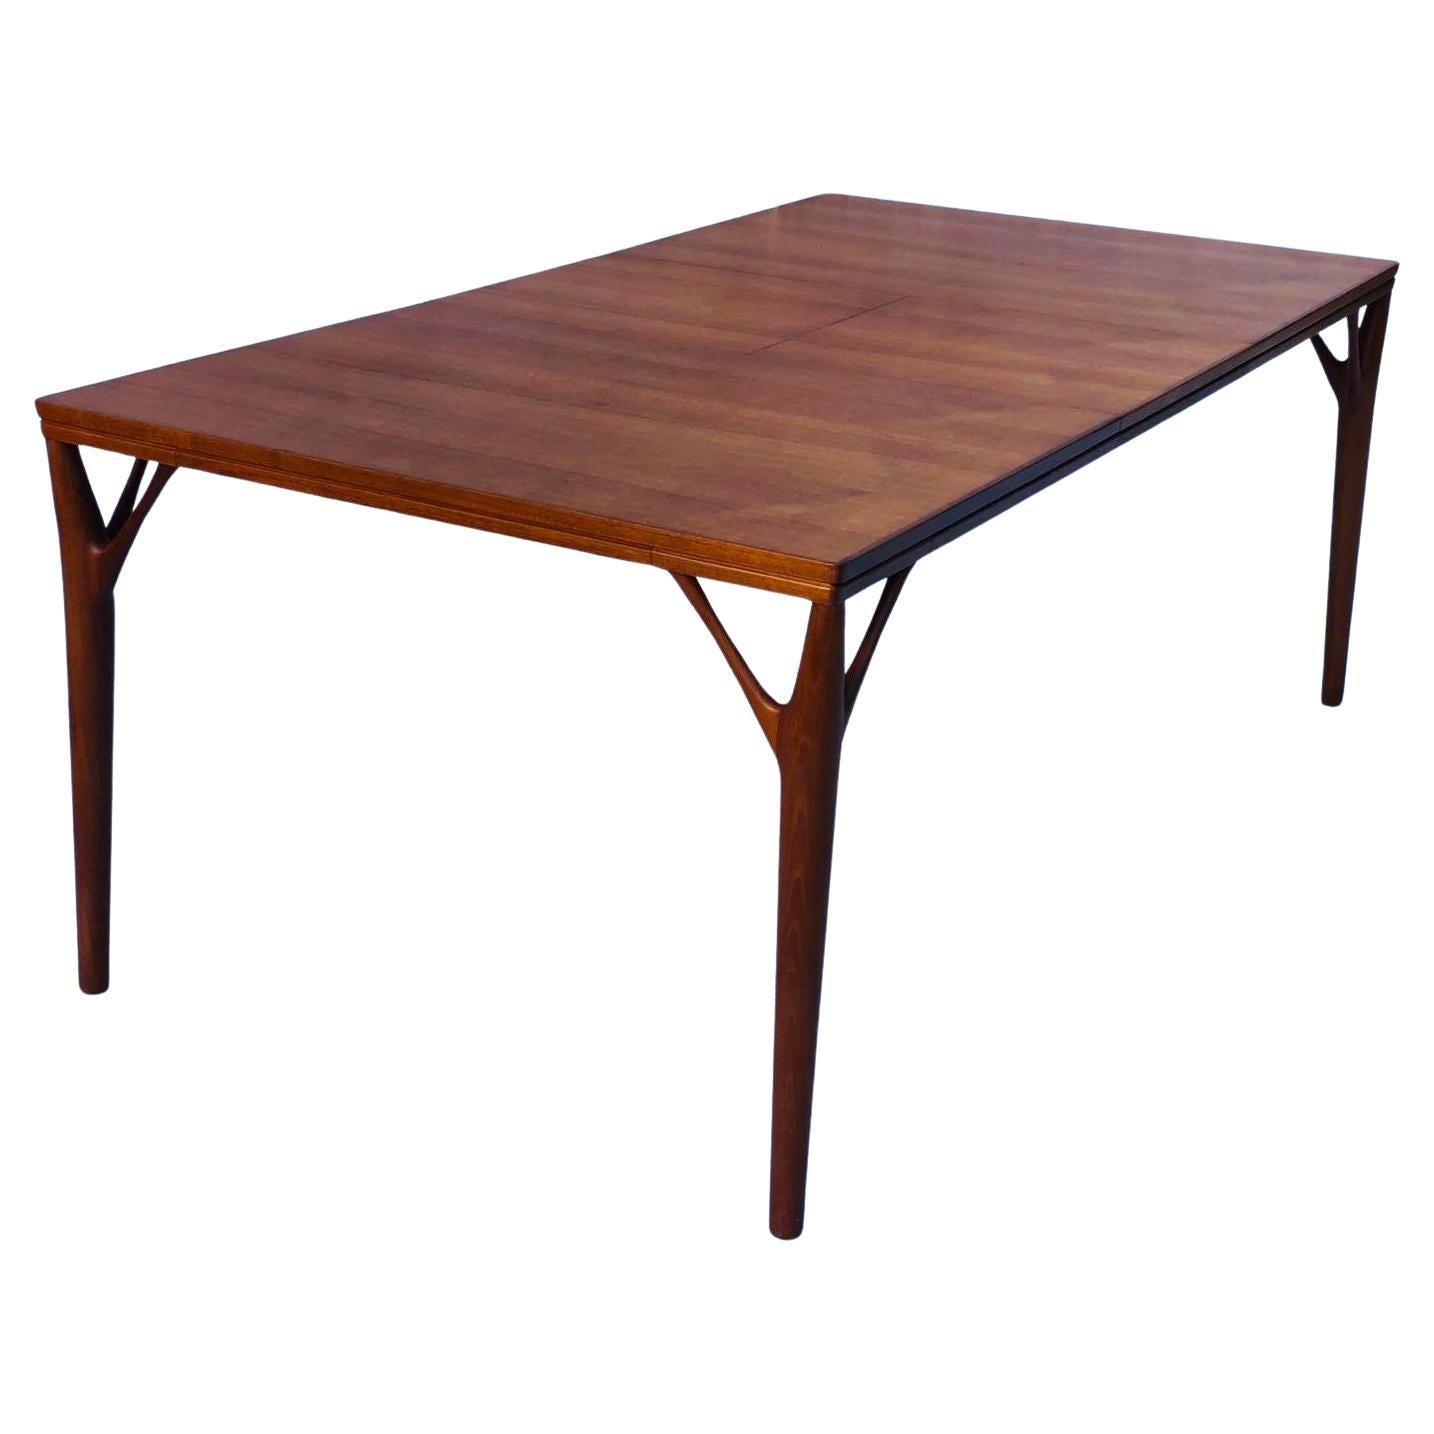 1960s Danish Teak Willy Sigh 'Tree Leg' Dining Table Model 180 by H Sigh & Søn 